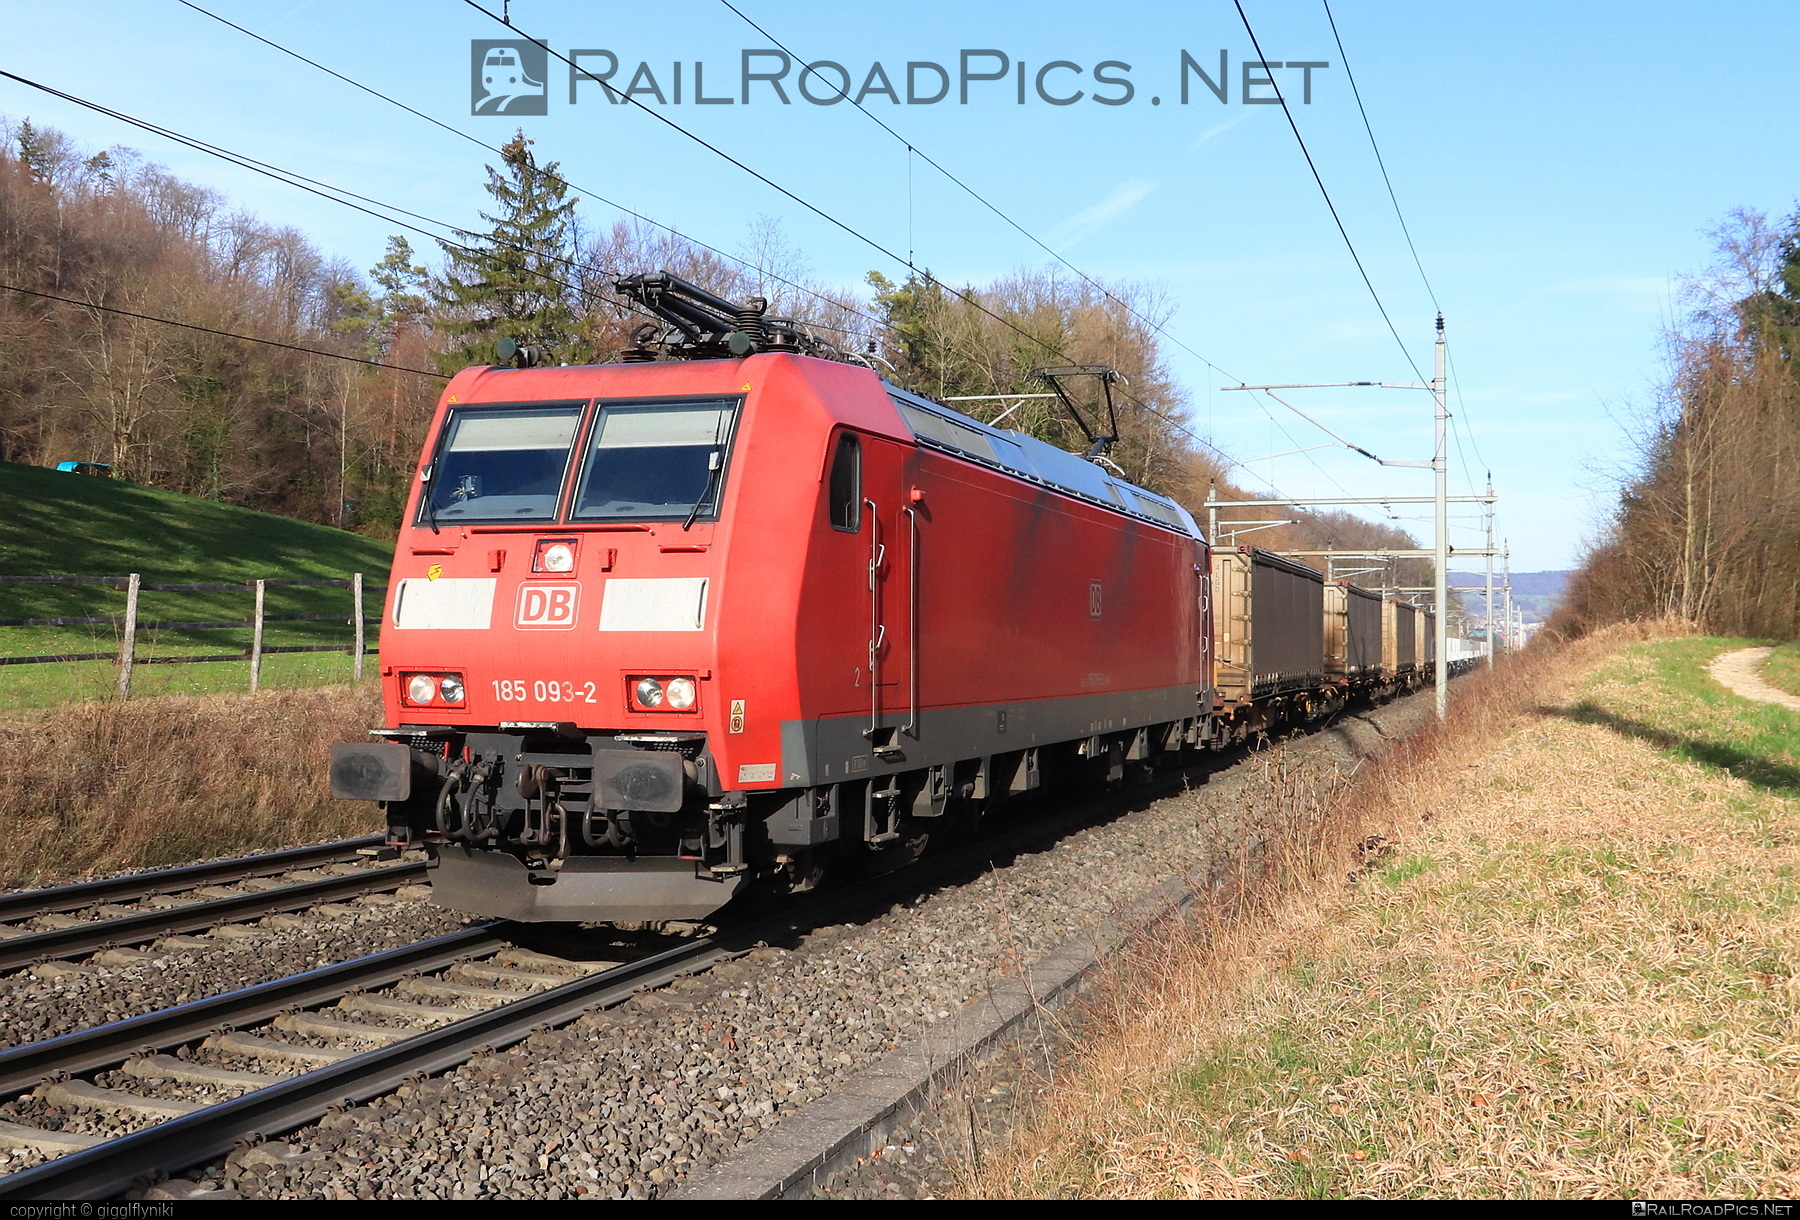 Bombardier TRAXX F140 AC1 - 185 093-2 operated by DB Cargo AG #bombardier #bombardiertraxx #db #dbcargo #dbcargoag #deutschebahn #traxx #traxxf140 #traxxf140ac #traxxf140ac1